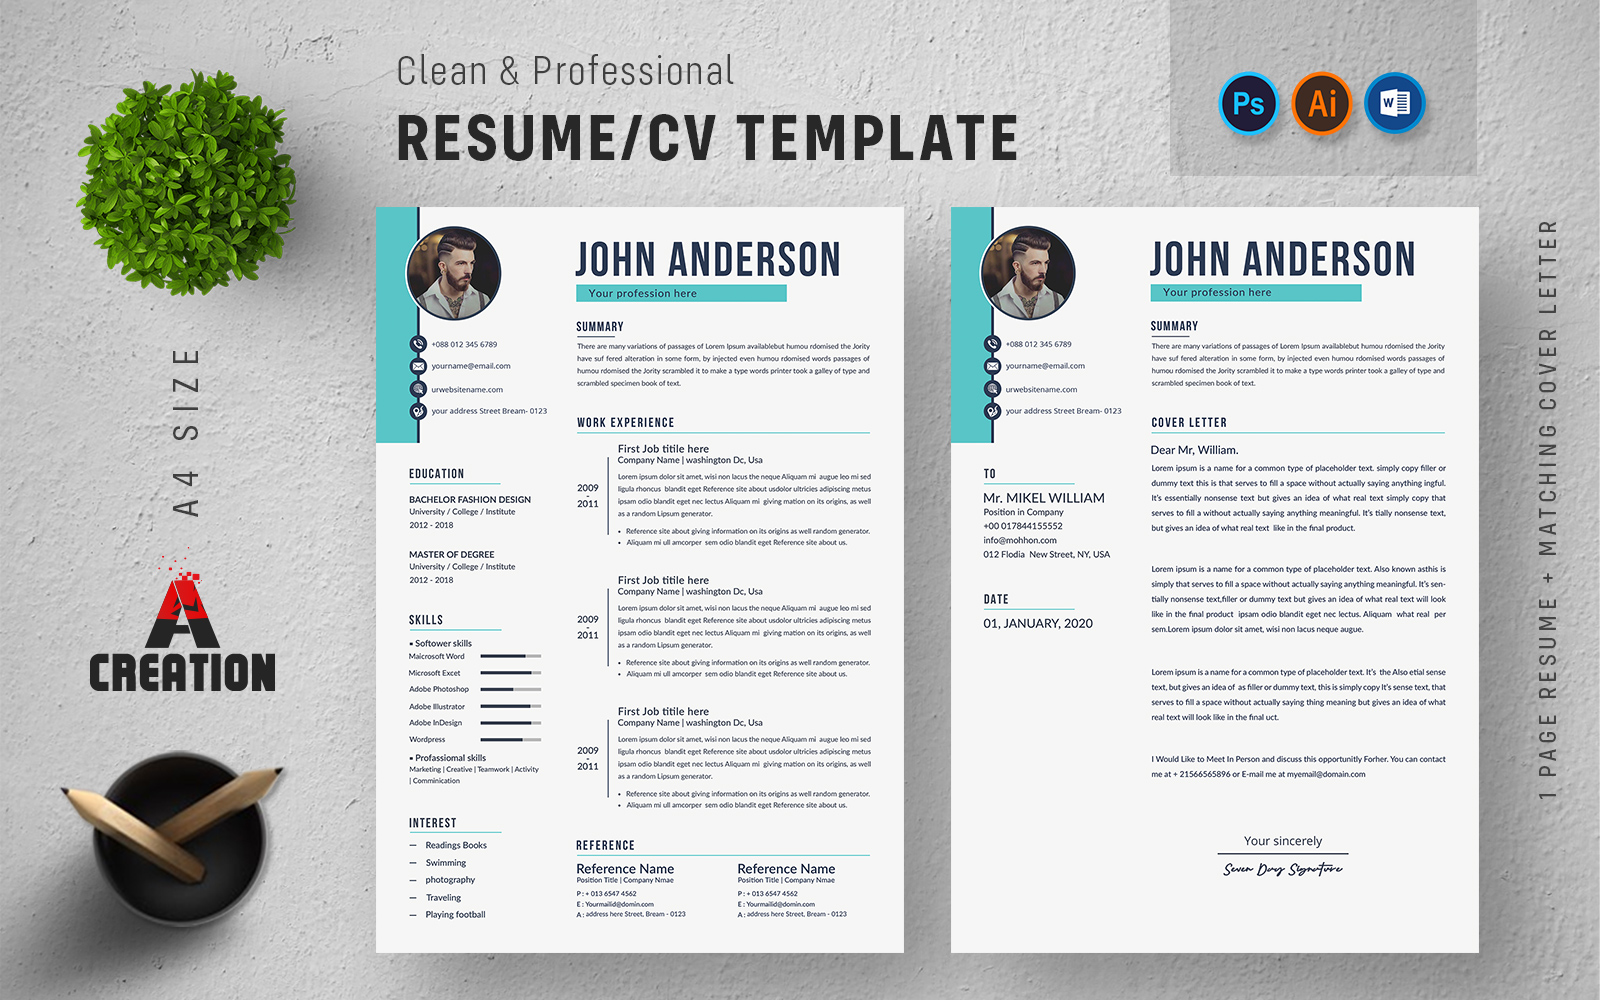 Clean & Professional Editable Resume Template